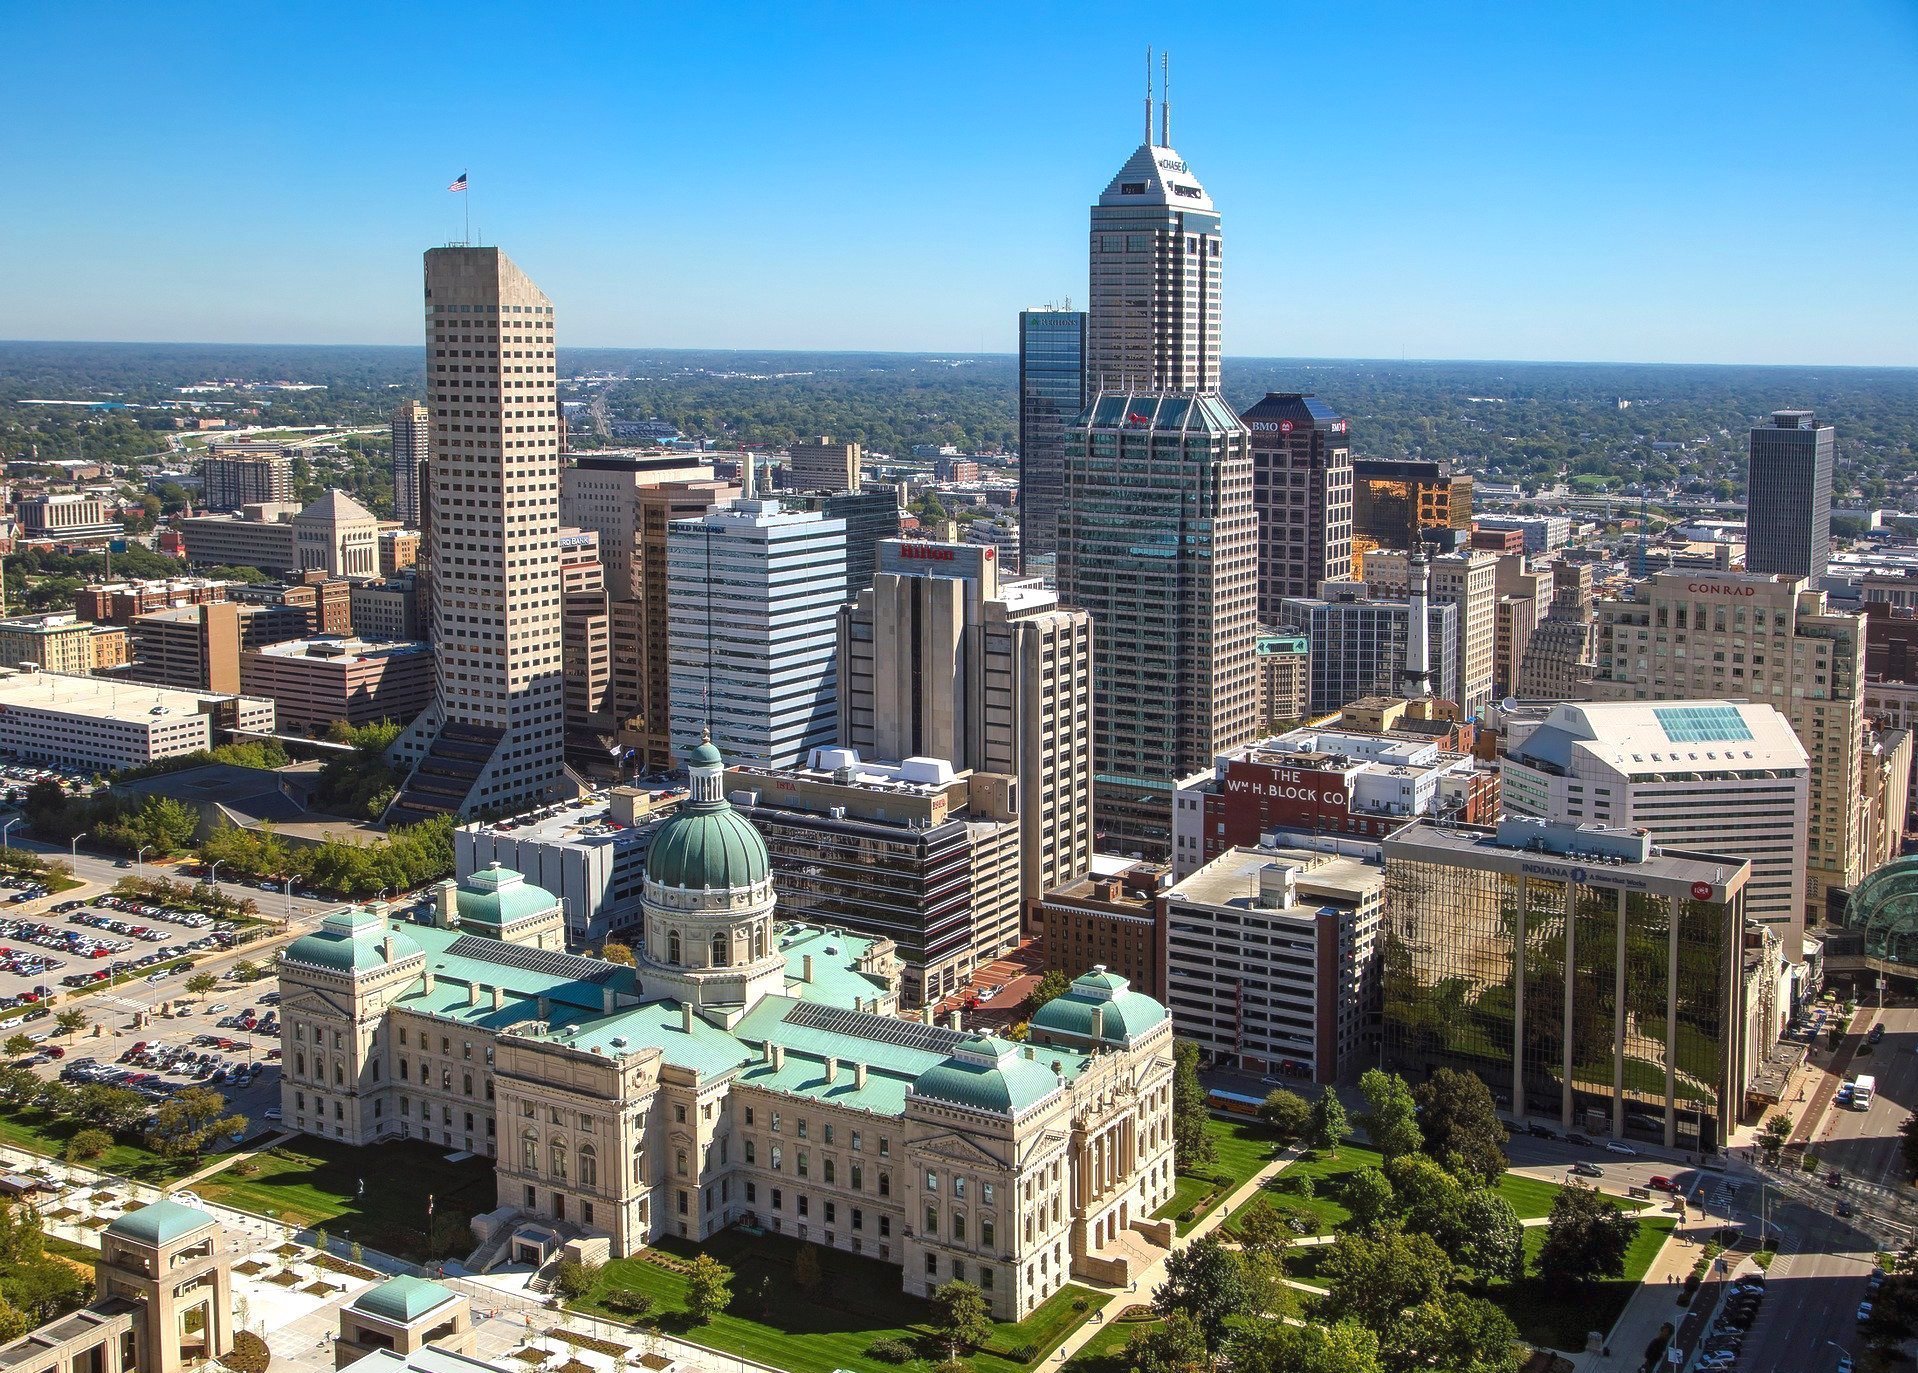 City skyline of Indianapolis, Indiana on a clear, sunny day